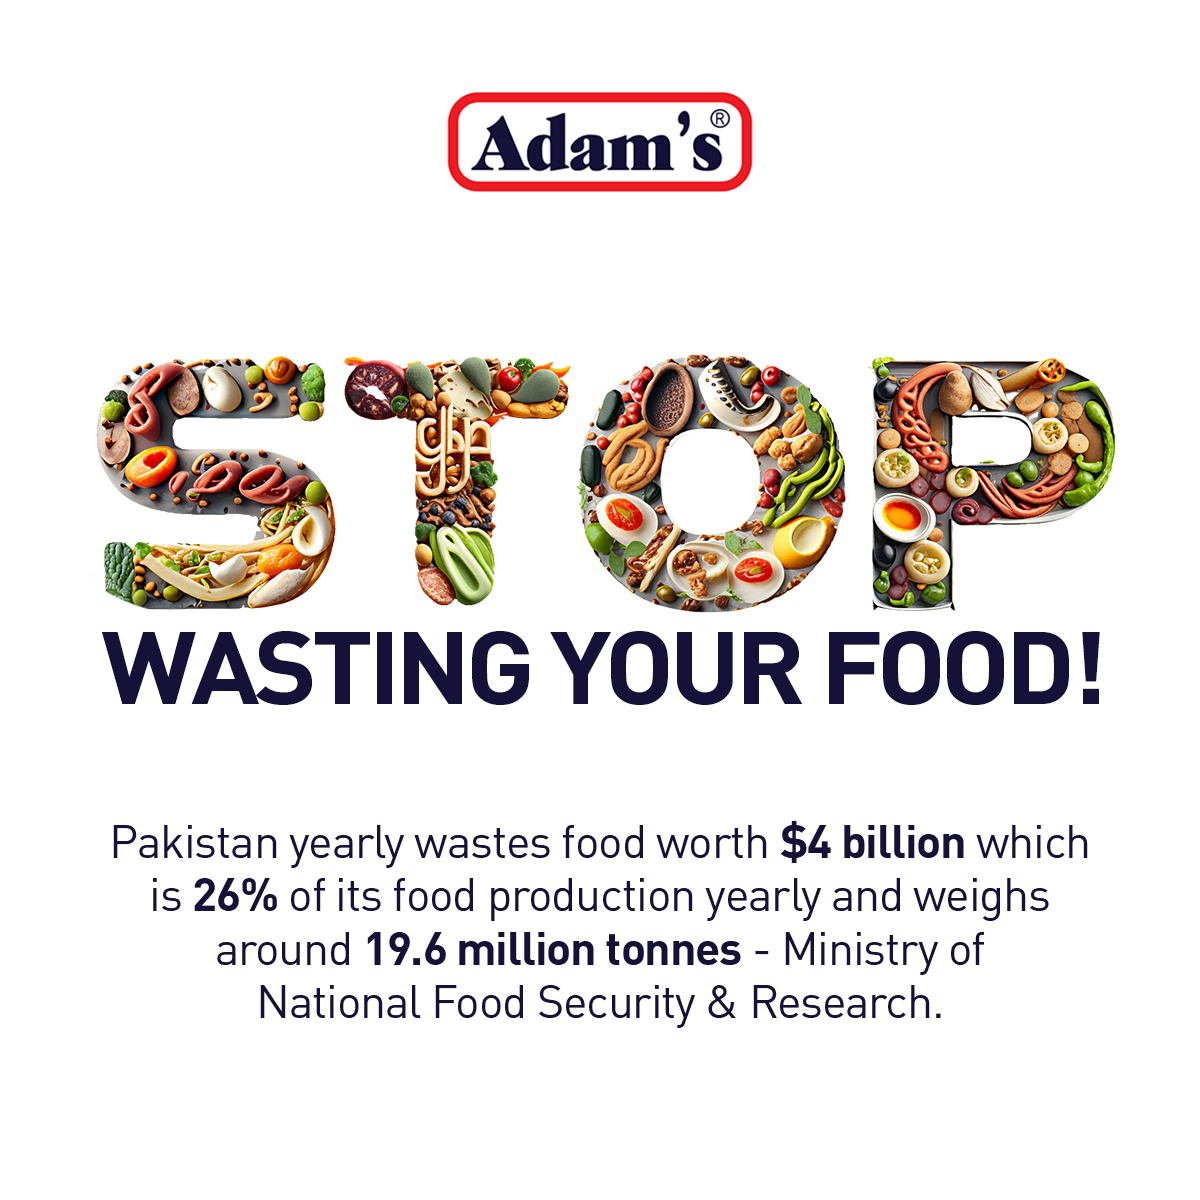 Food should never go to waste.
Let us all join hands to stop food wastage and share as much as we can. 
 
#AdamsMilkFoods #FoodAwarenessDay #StopWastingFood